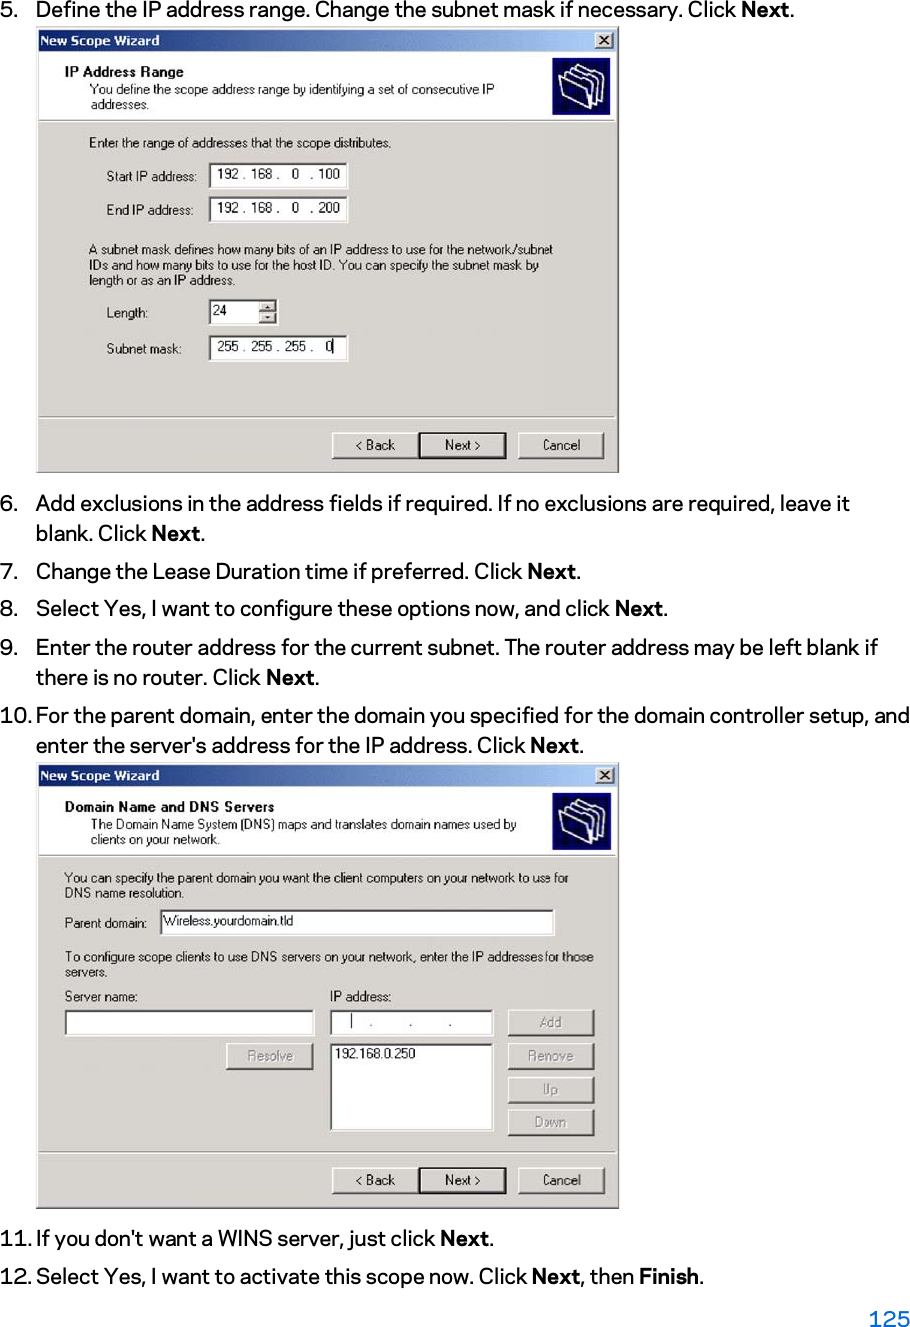 5. Define the IP address range. Change the subnet mask if necessary. Click Next. 6. Add exclusions in the address fields if required. If no exclusions are required, leave it blank. Click Next.  7. Change the Lease Duration time if preferred. Click Next. 8. Select Yes, I want to configure these options now, and click Next.  9. Enter the router address for the current subnet. The router address may be left blank if there is no router. Click Next.  10. For the parent domain, enter the domain you specified for the domain controller setup, and enter the server&apos;s address for the IP address. Click Next. 11. If you don&apos;t want a WINS server, just click Next.  12. Select Yes, I want to activate this scope now. Click Next, then Finish.  125